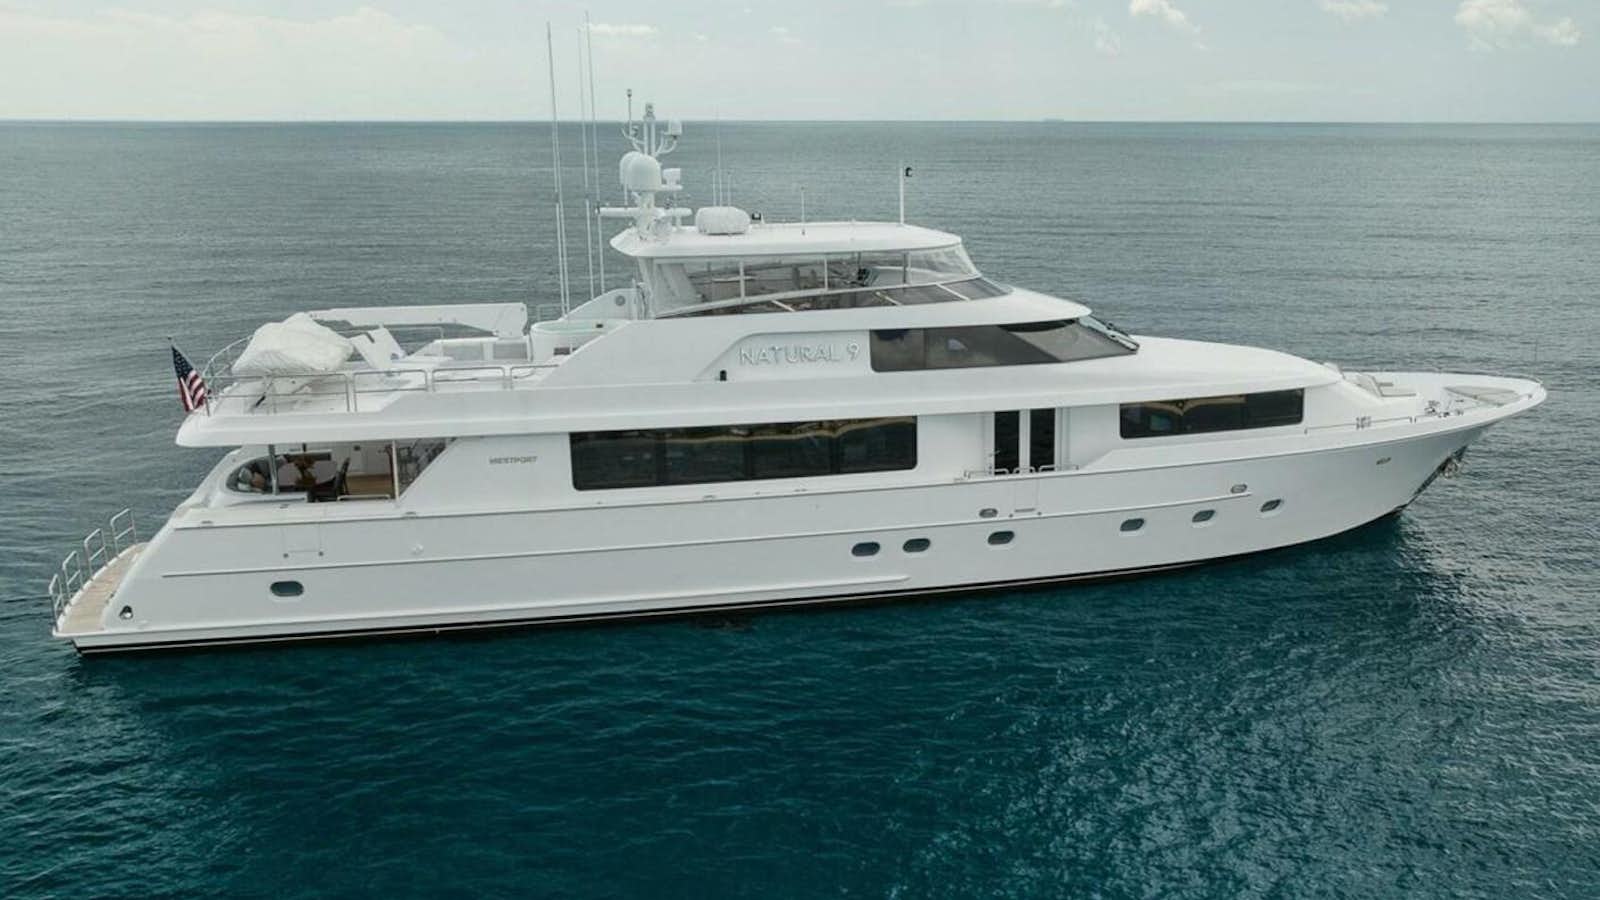 a white yacht in the water aboard NATURAL 9 Yacht for Sale